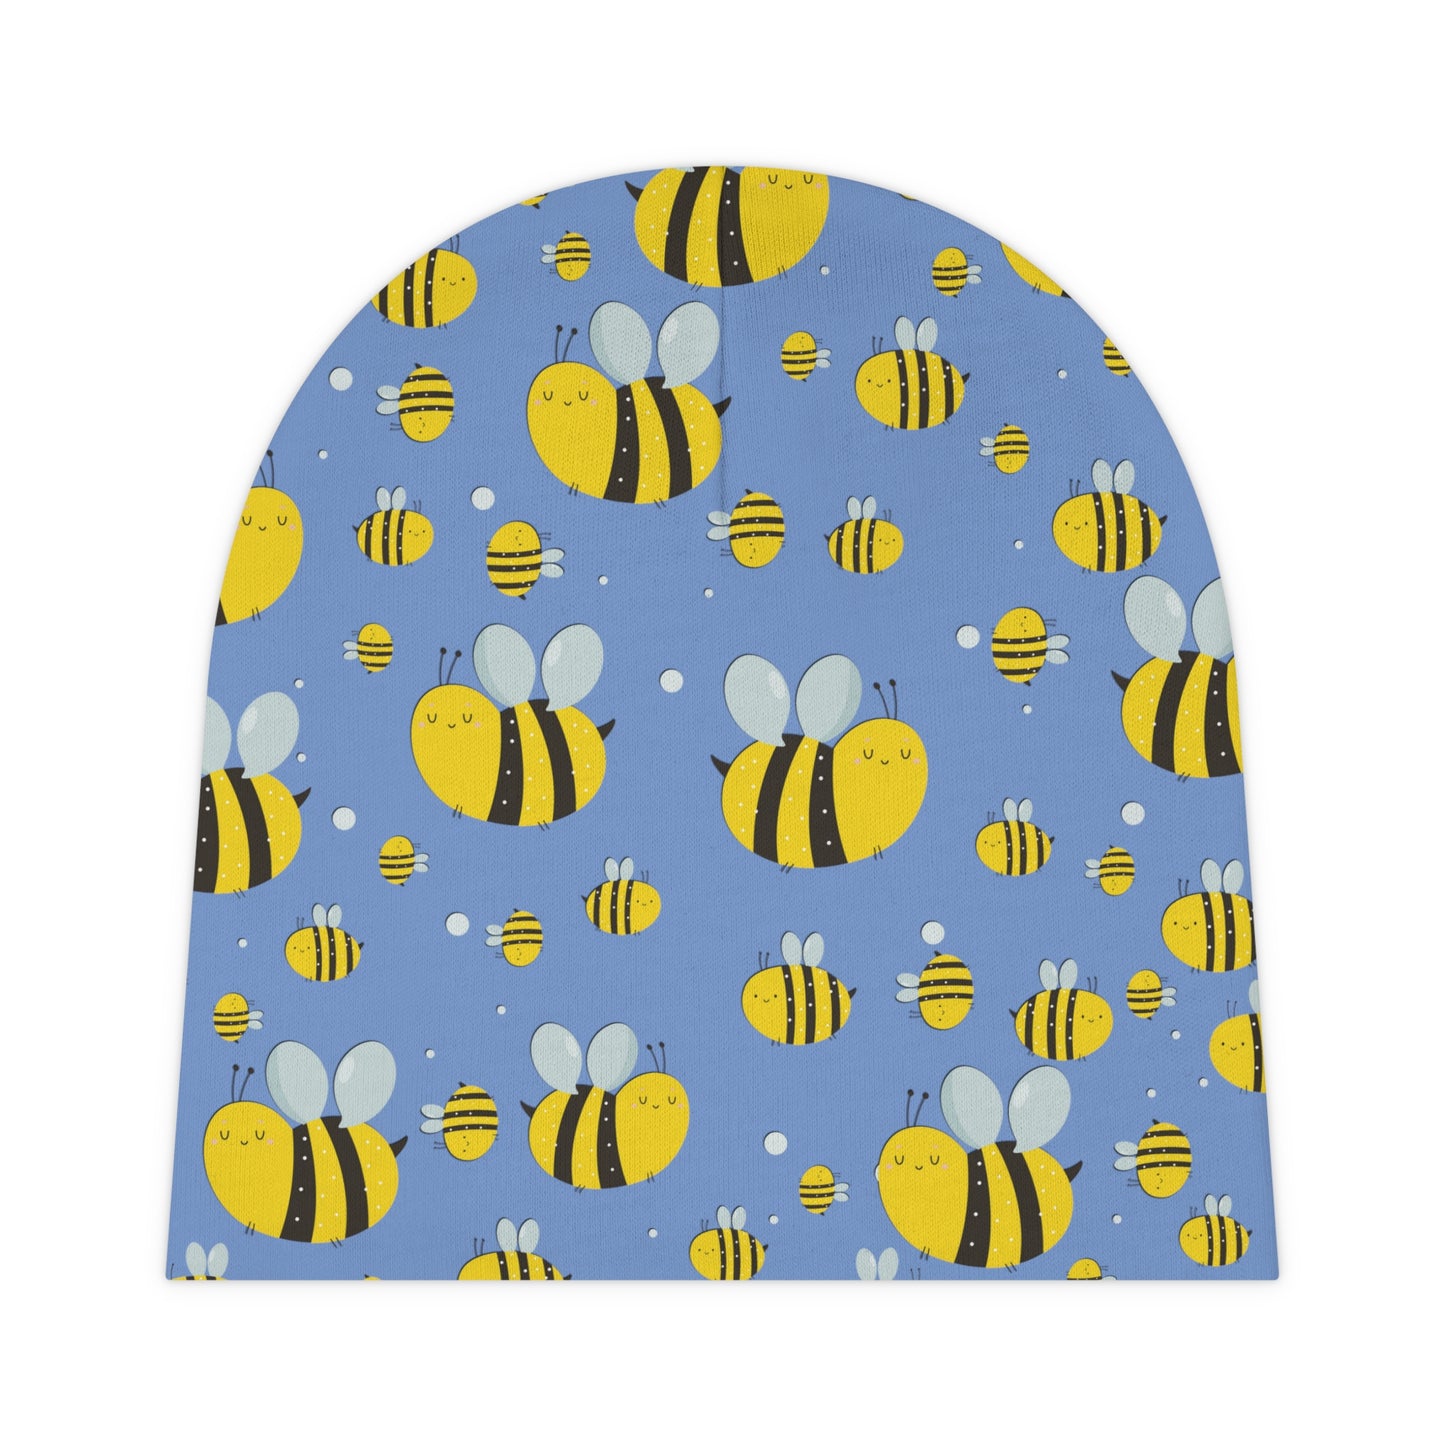 Lots of Bees - Fennel Flower 74a6ff - Baby Beanie (AOP)